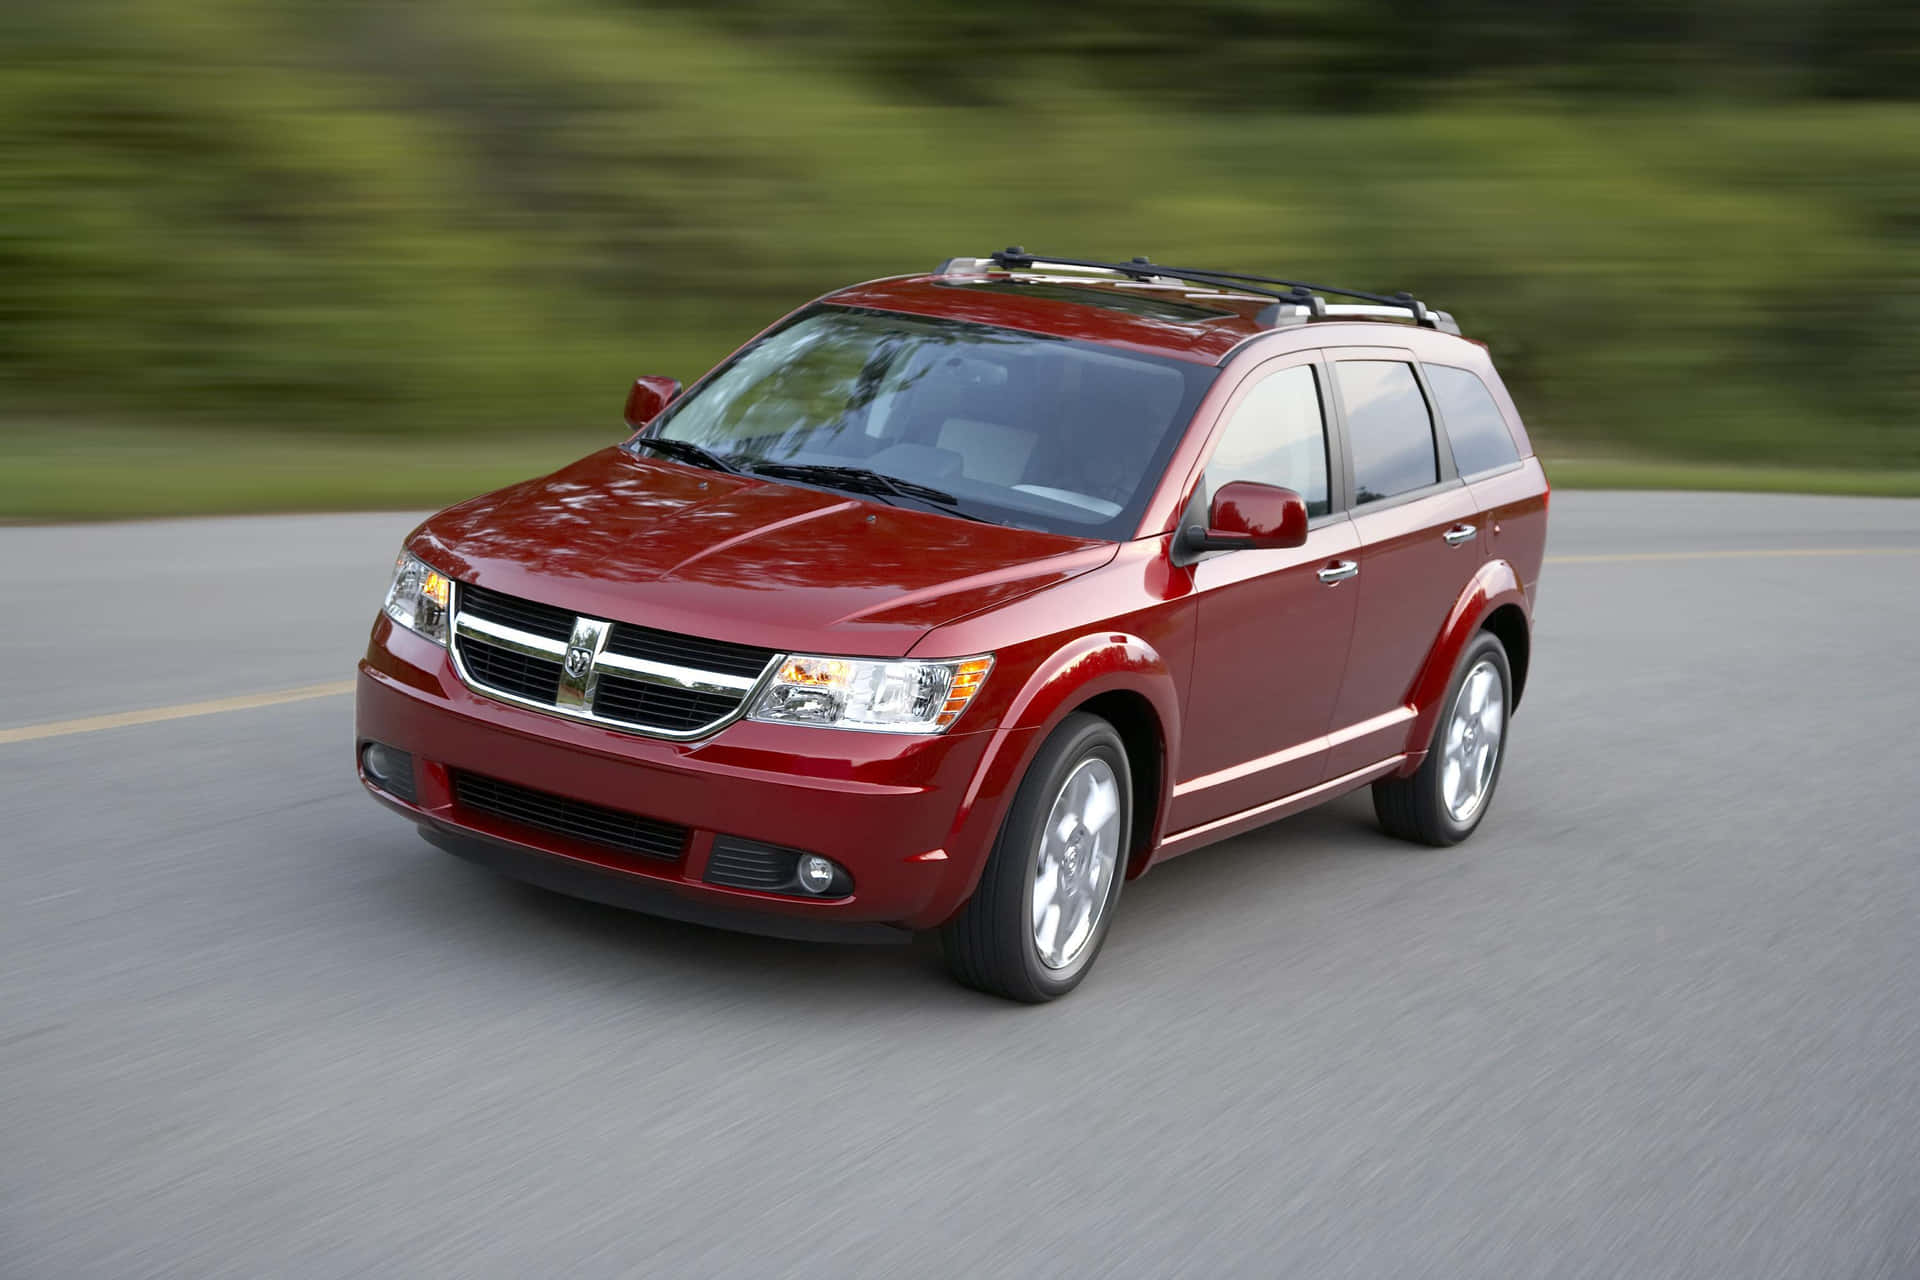 Majestic View Of A Dodge Journey On Open Road Wallpaper